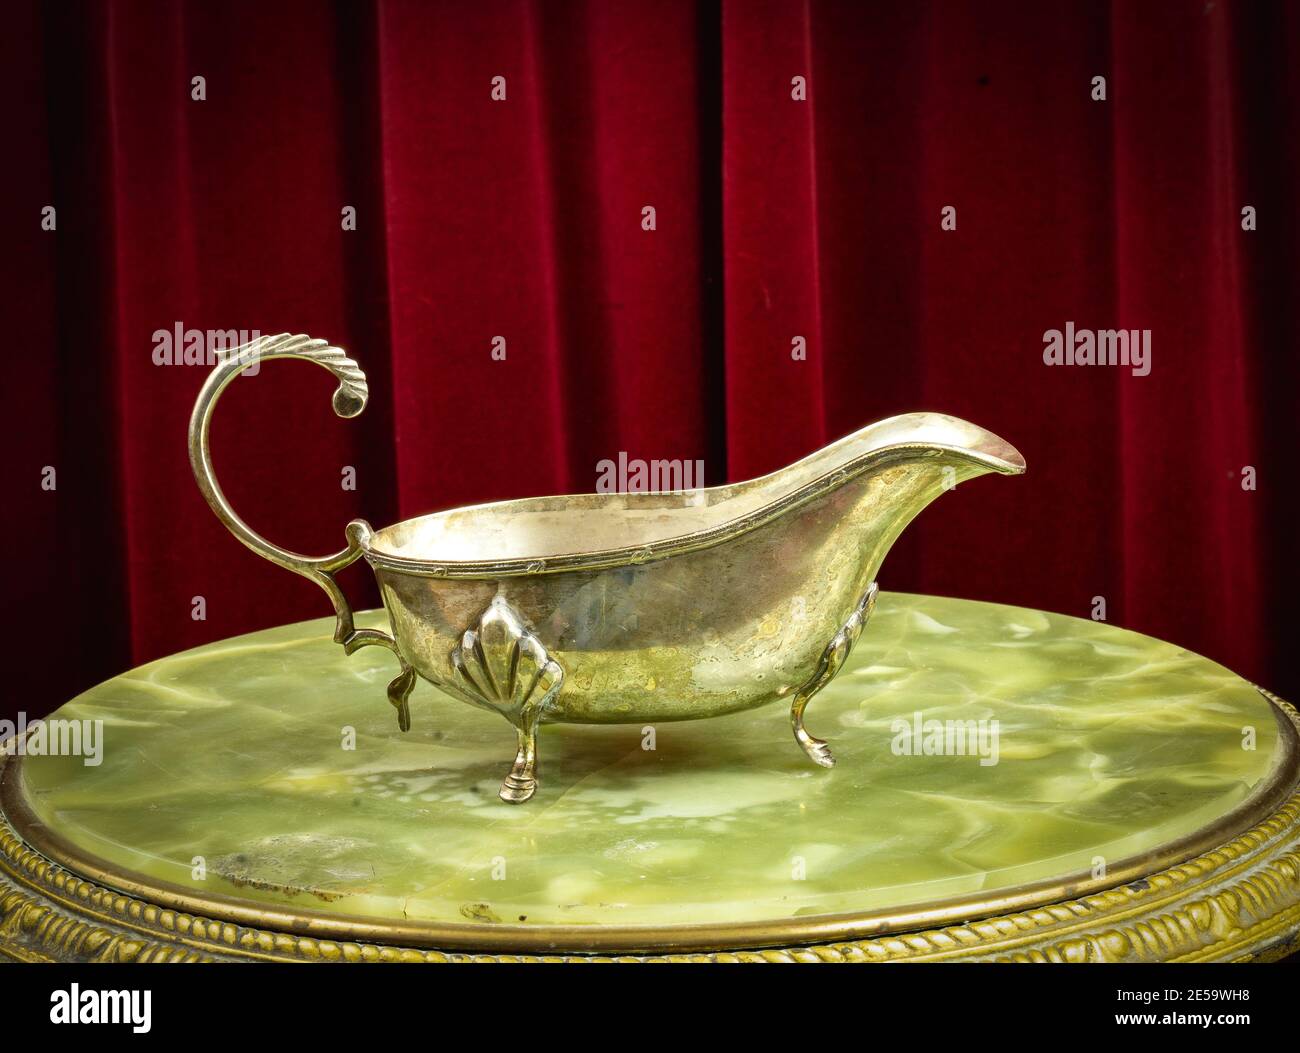 Sauciere, saucer - Ornate metal gravy boat, vintage old fashioned dish on a red background Stock Photo